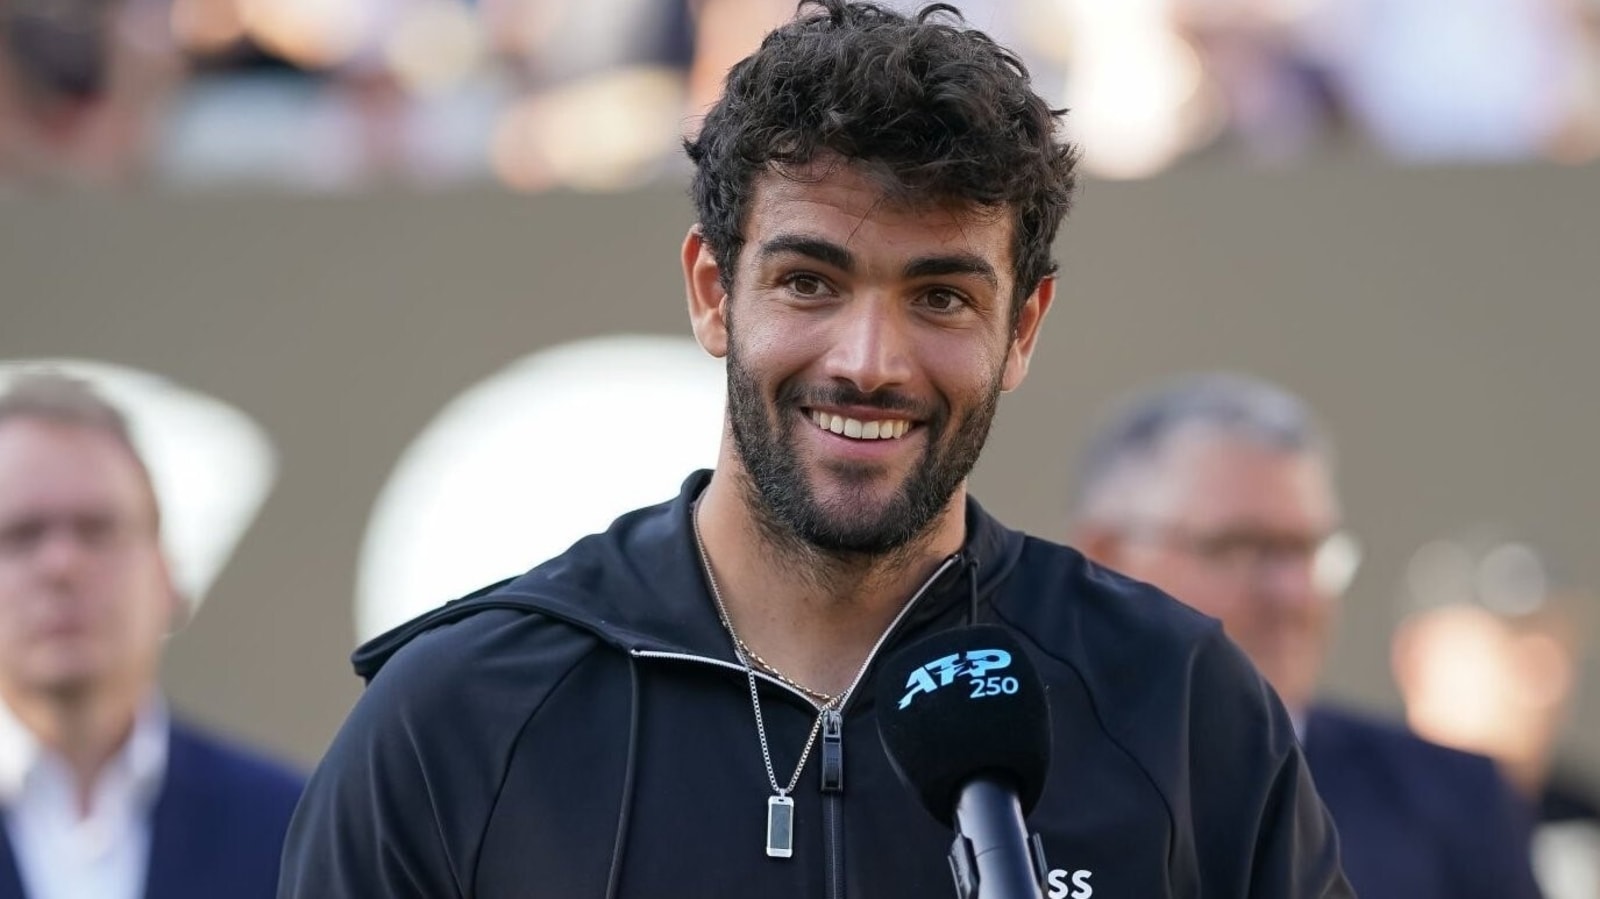 Watch: Fan interrupts Matteo Berrettini's interview with marriage proposal, here's how tennis star reacted